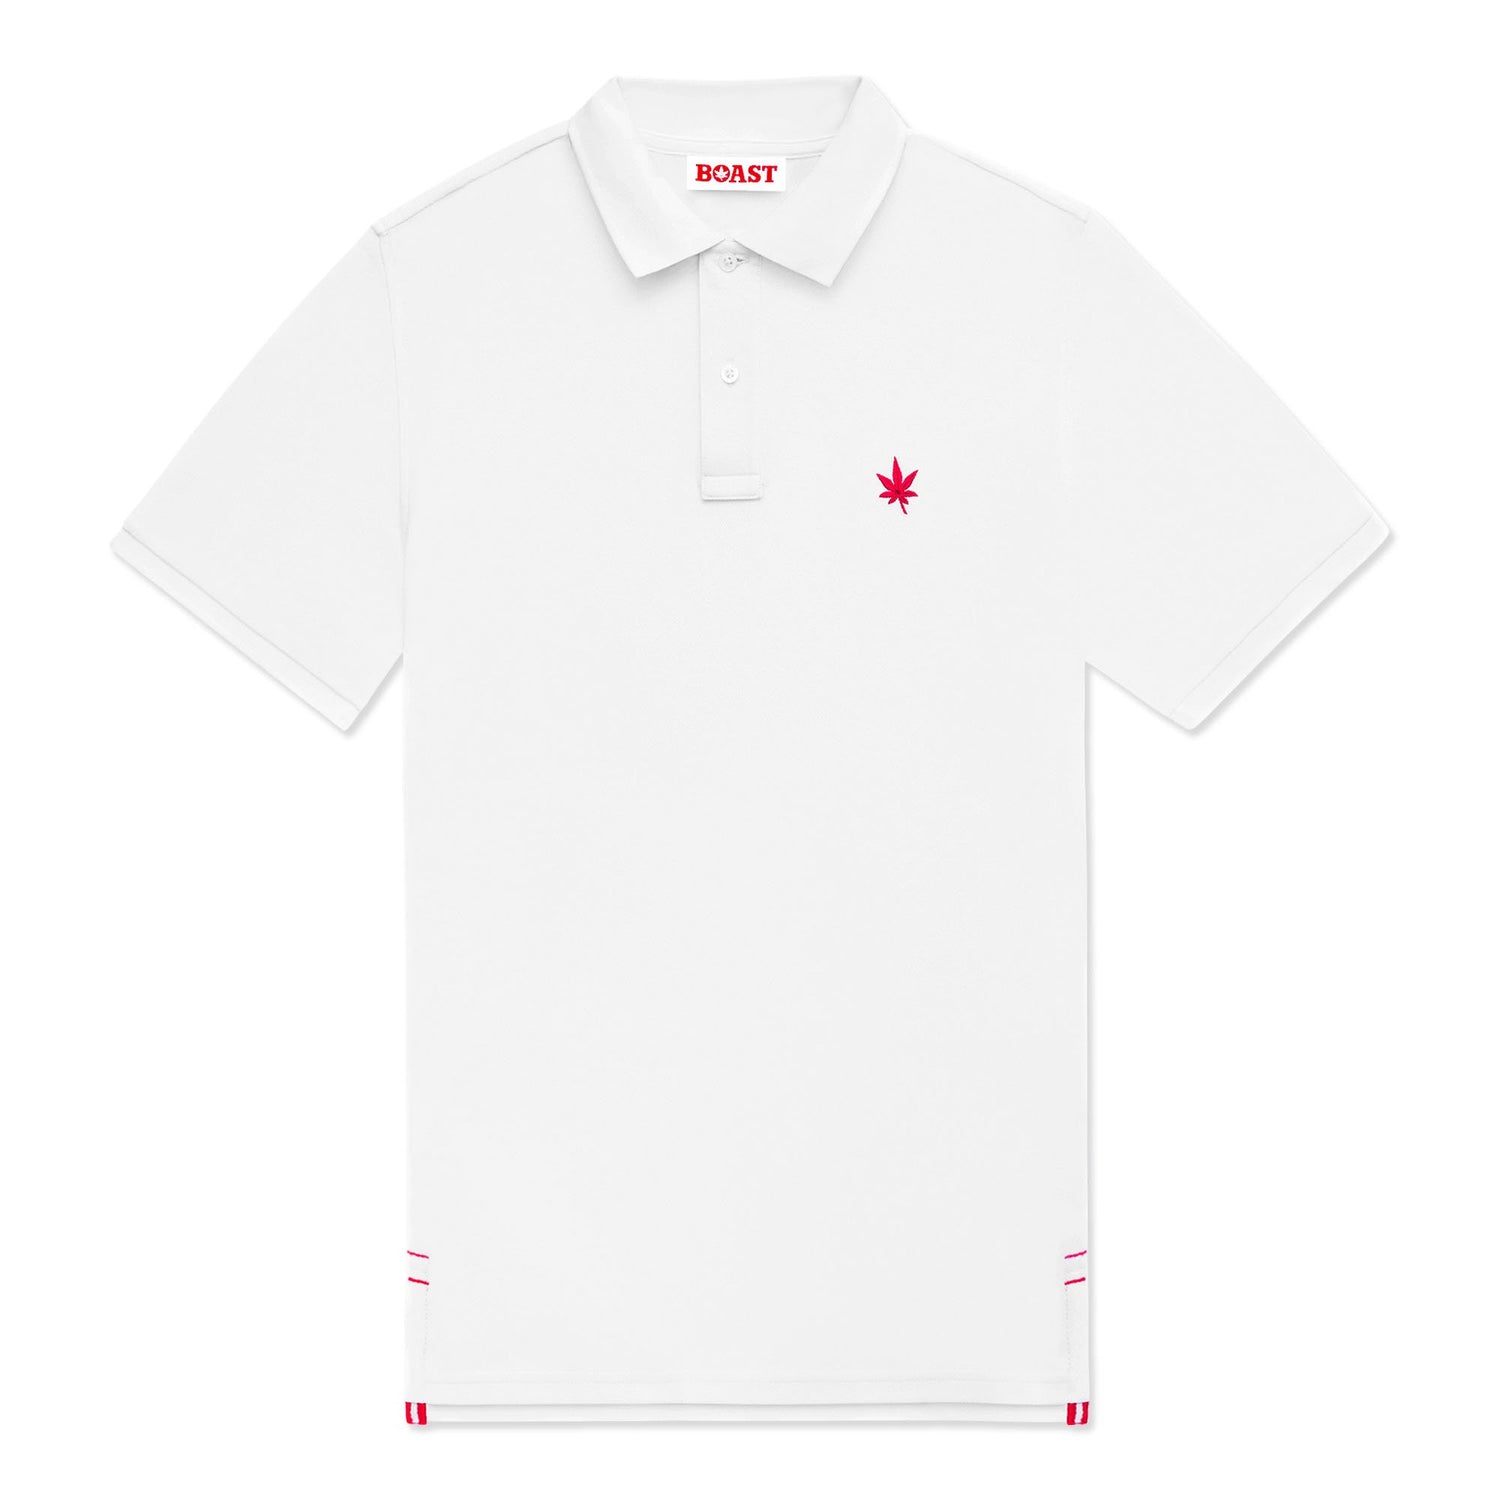 White polo with red embroidered leaf on the left chest.